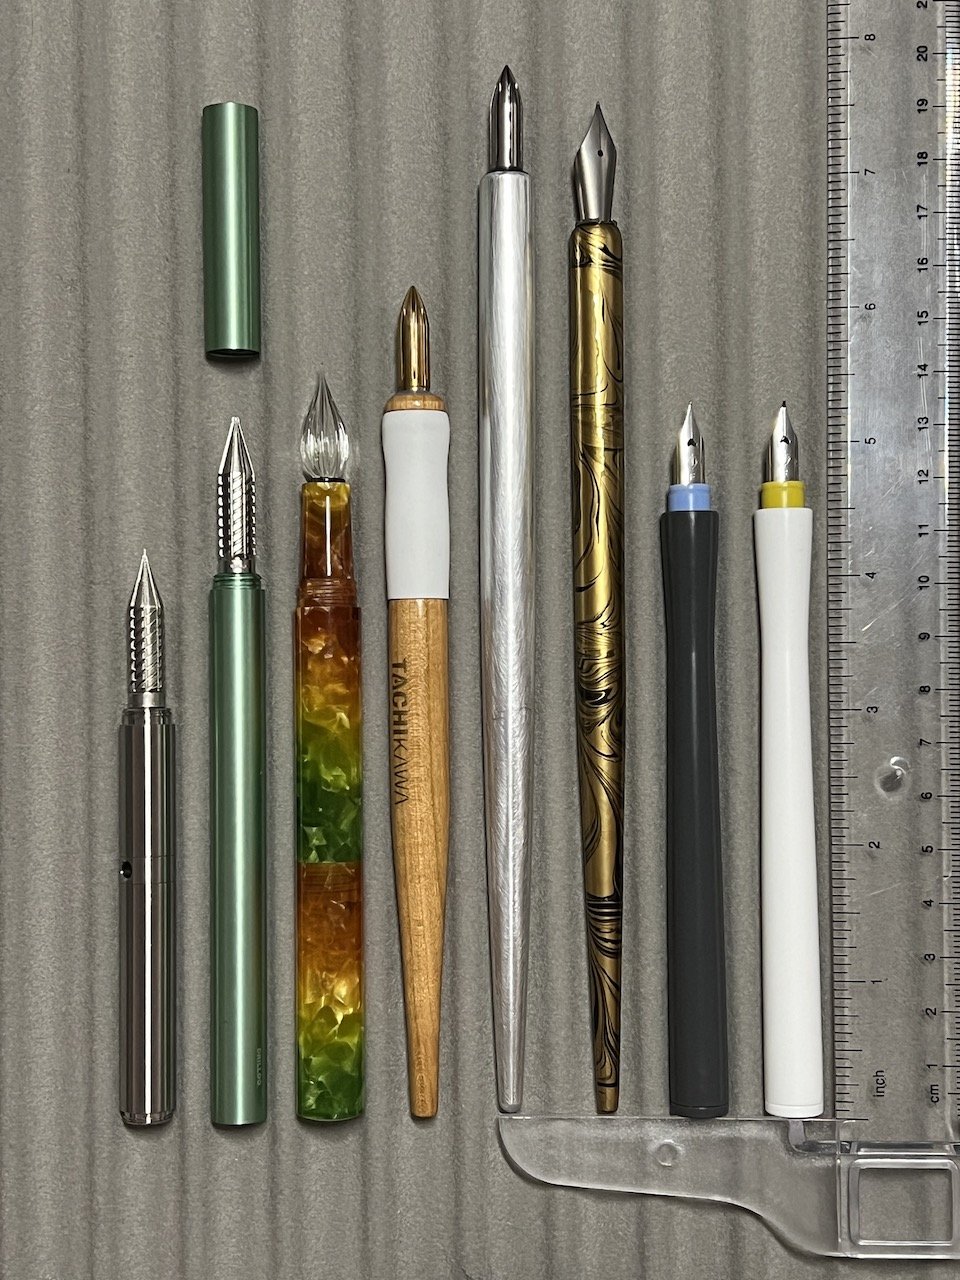 Any pens with similar nibs to dip pen nibs? : r/fountainpens